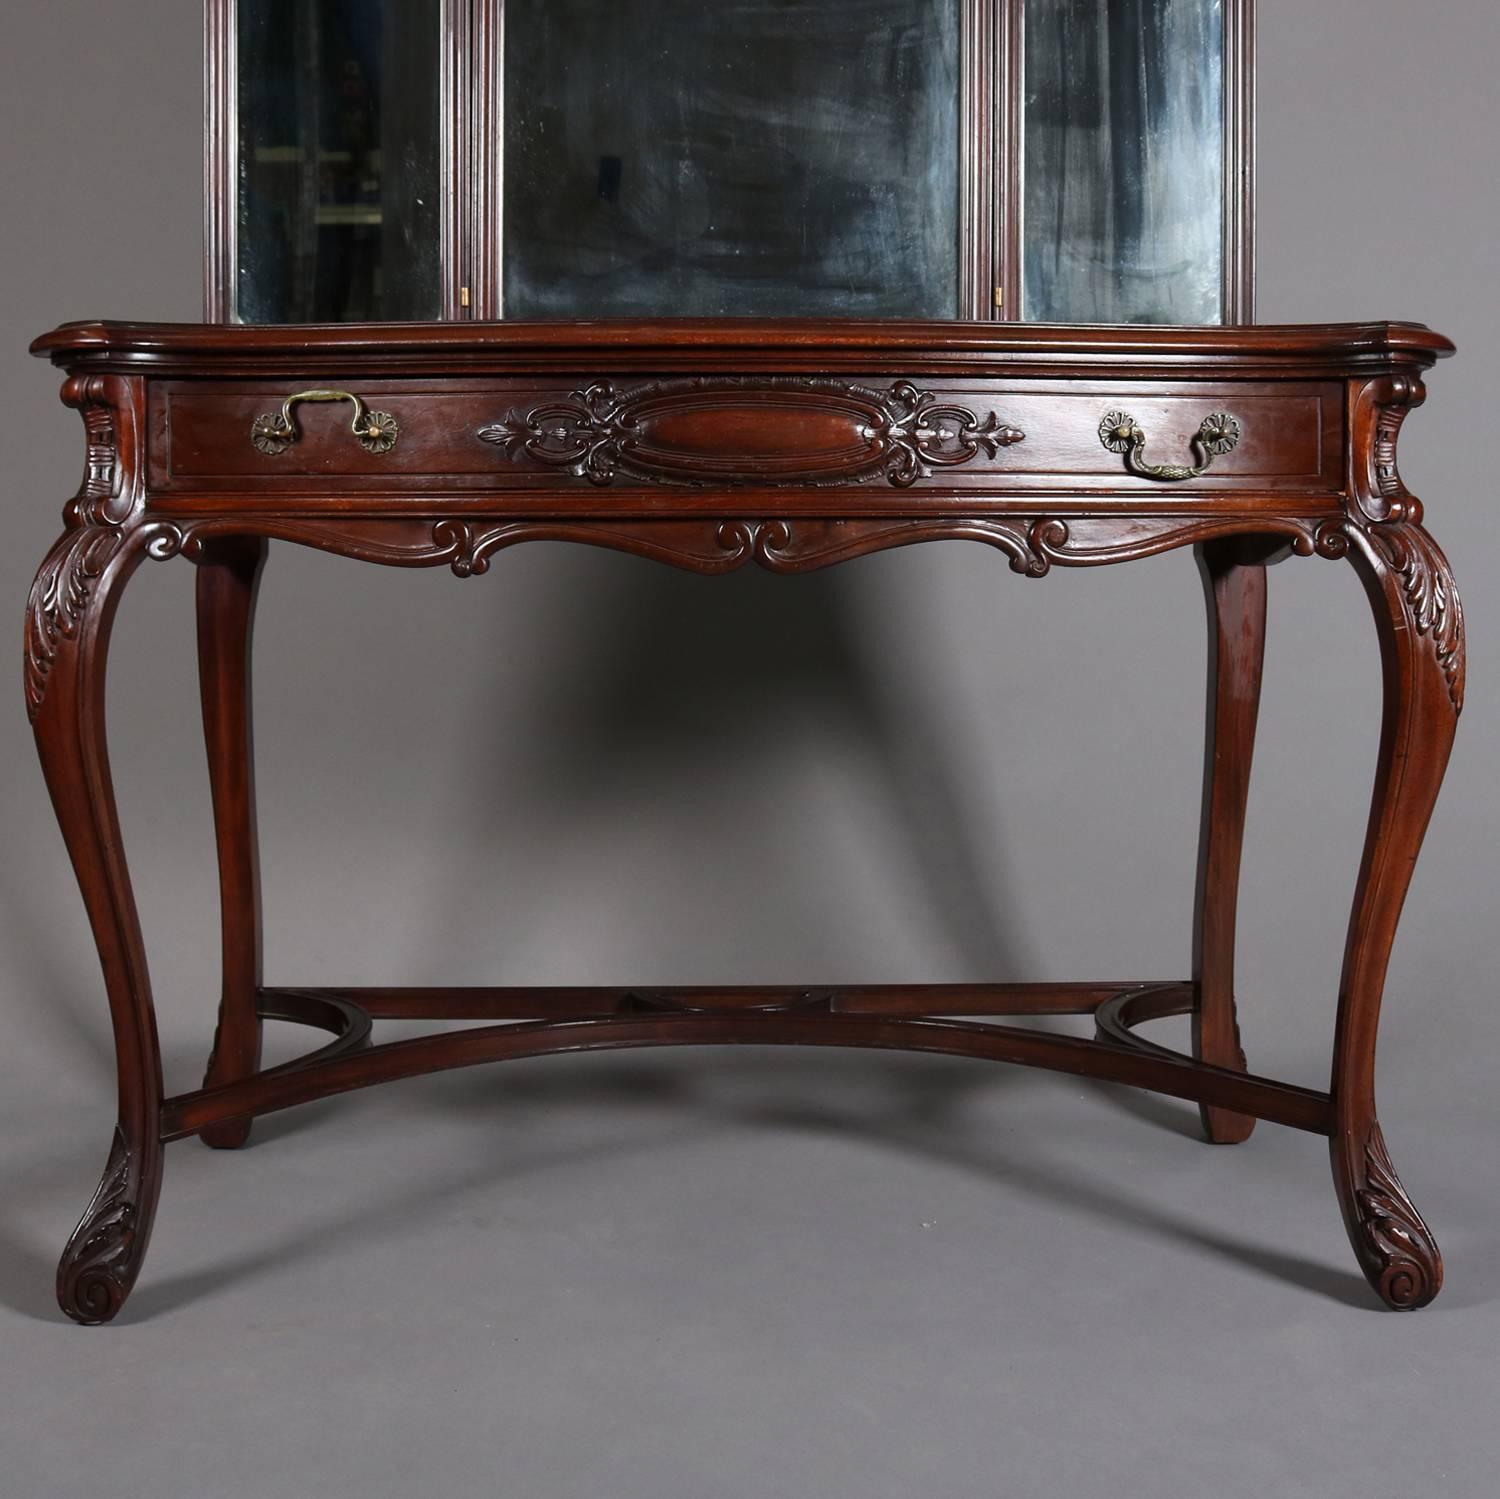 Antique mahogany vanity features carved foliate decoration, has central drawer, triptych mirror, and seated on acanthus carved cabriole legs, bronze pulls, c1890

Measures - 62.5